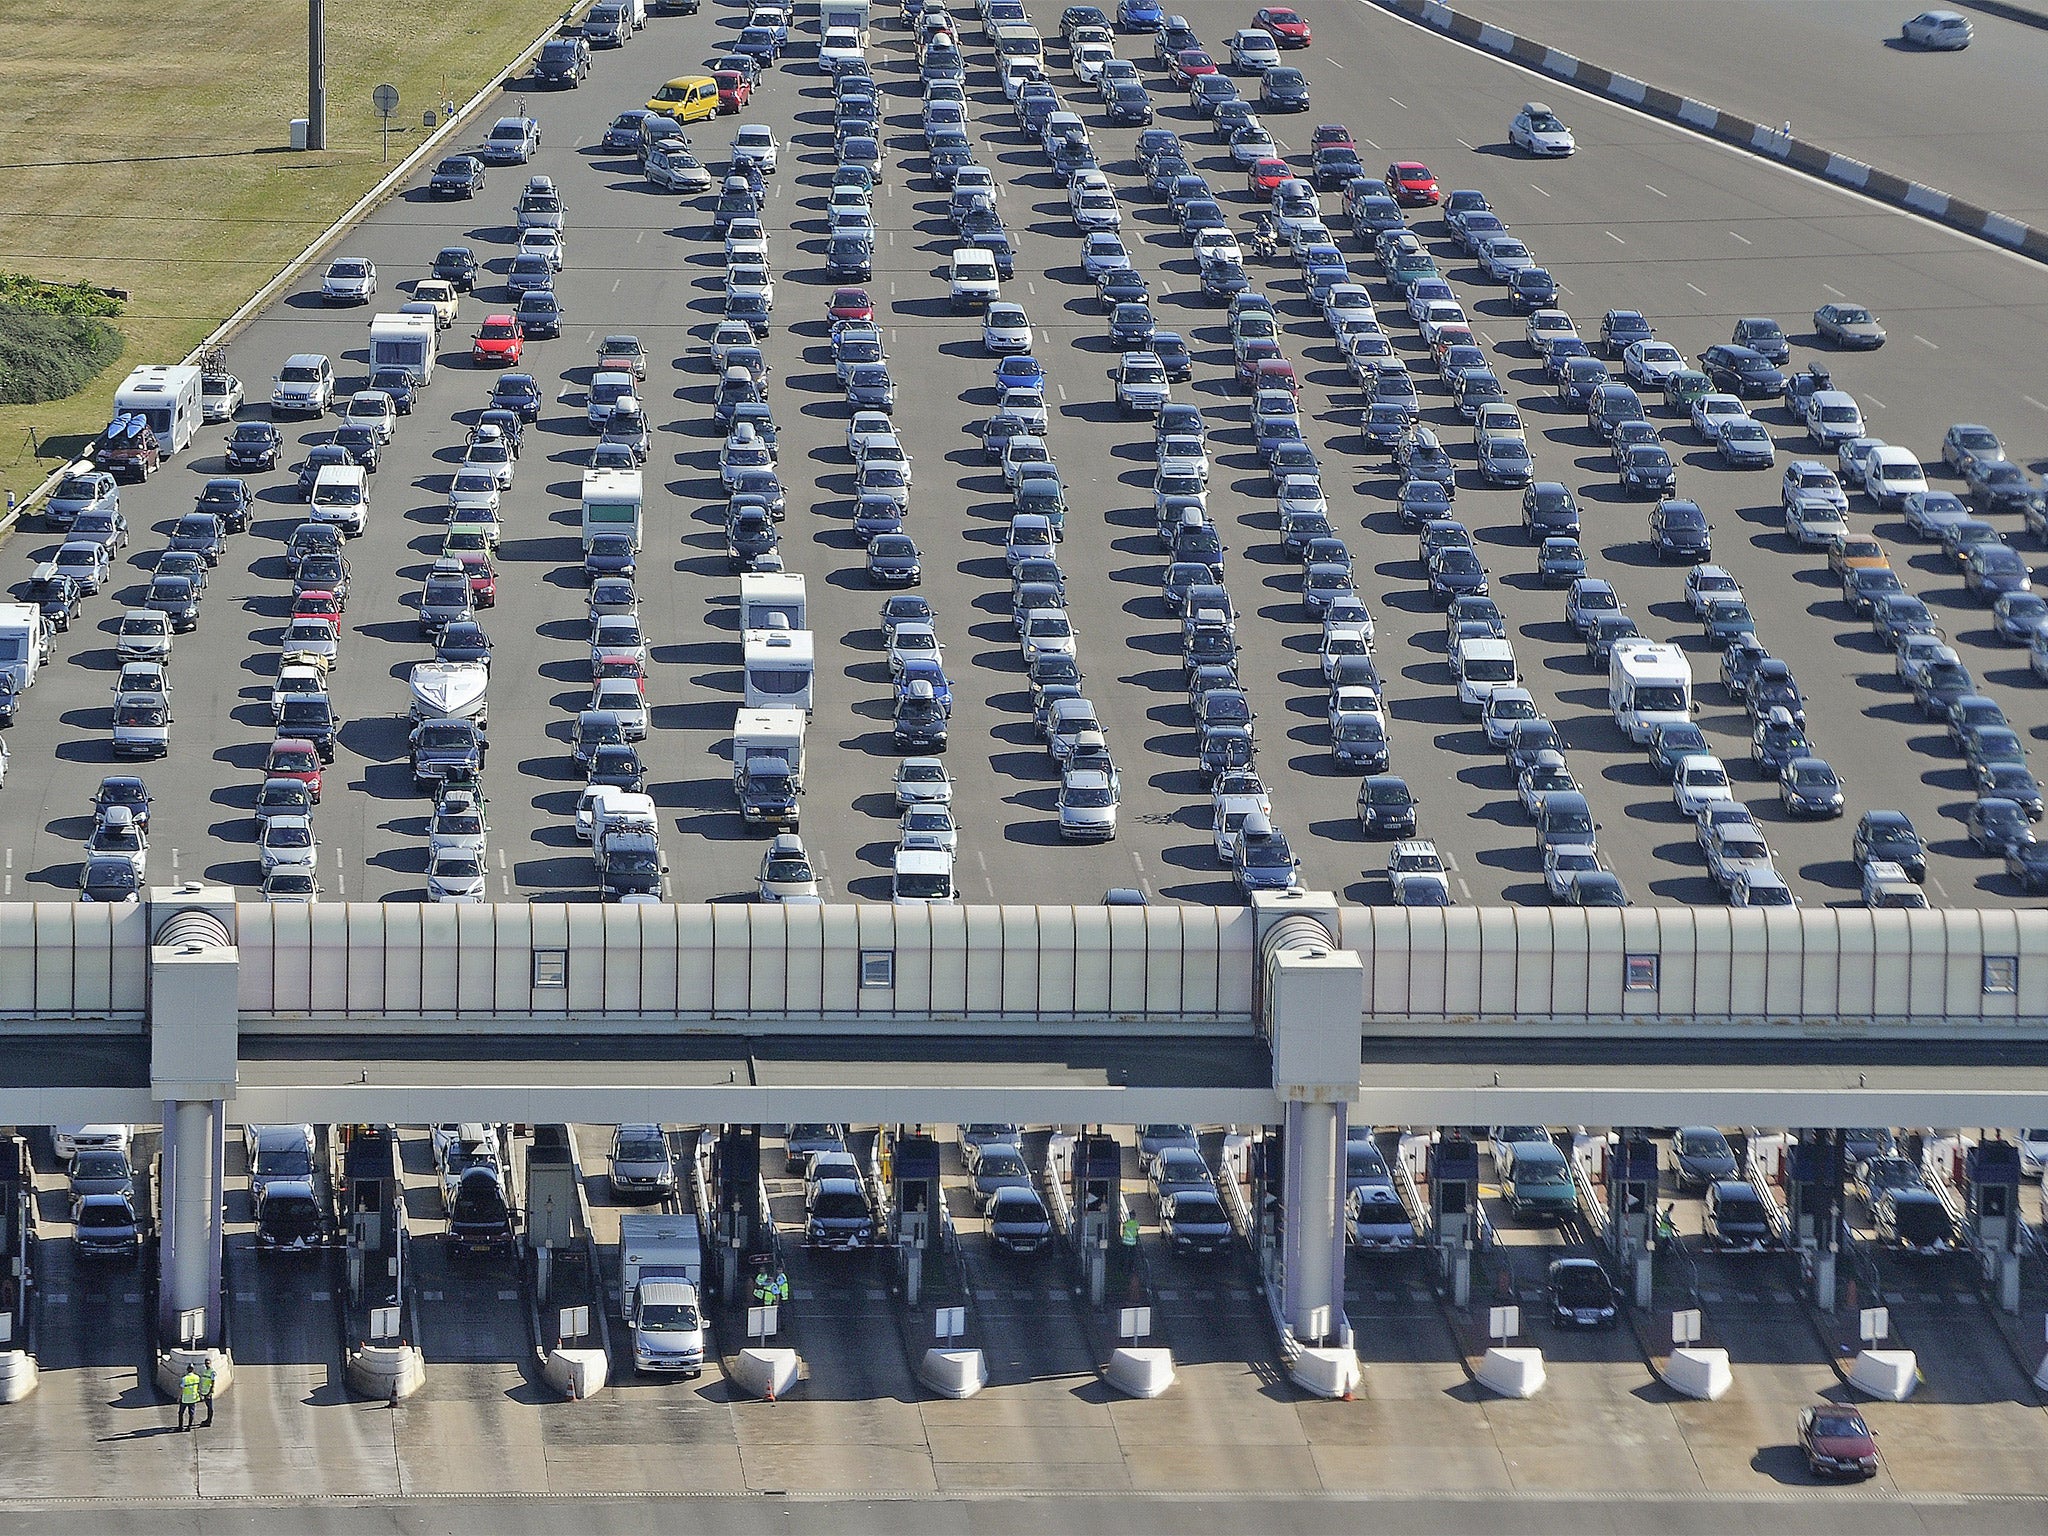 Choking the planet: Cars lined up near a toll station in France (AFP/Getty Images)